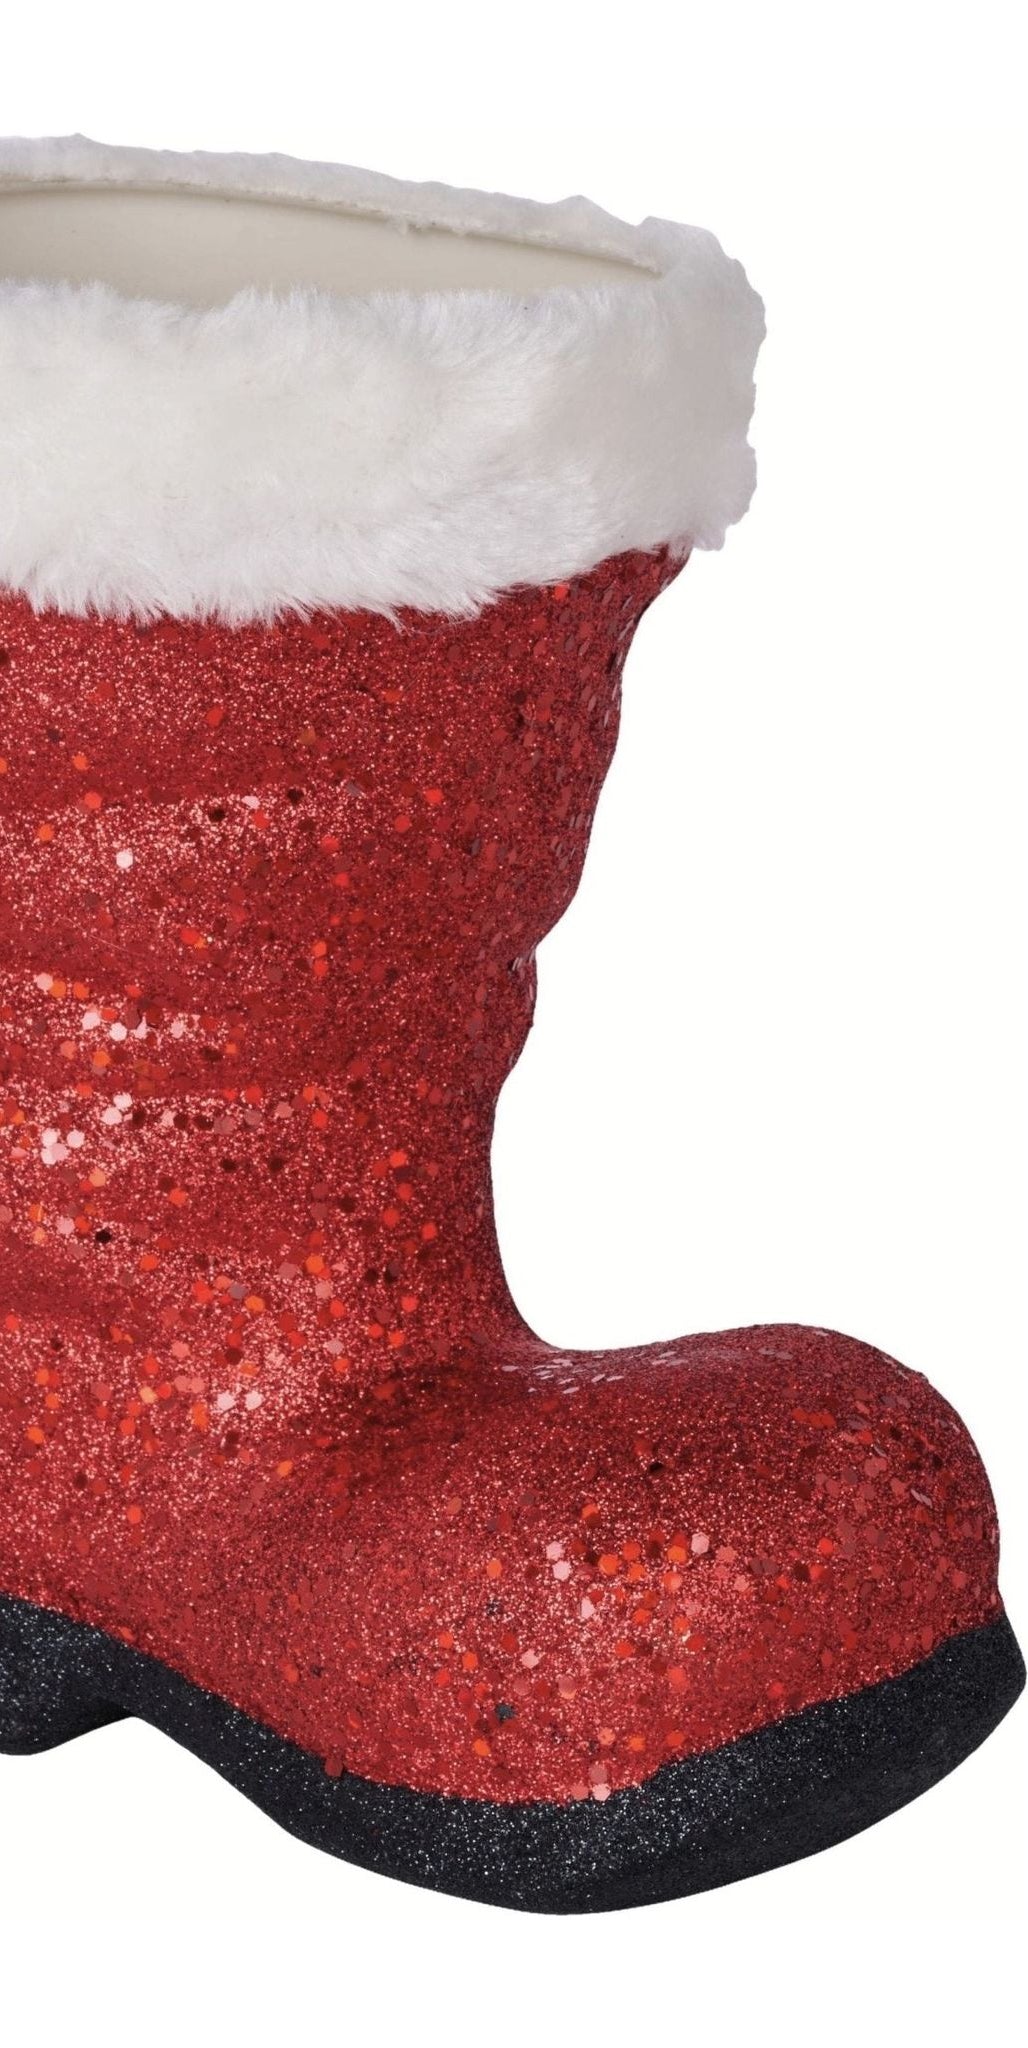 9.5" Glitter Fur Santa Boot: Red - Michelle's aDOORable Creations - Holiday Ornaments